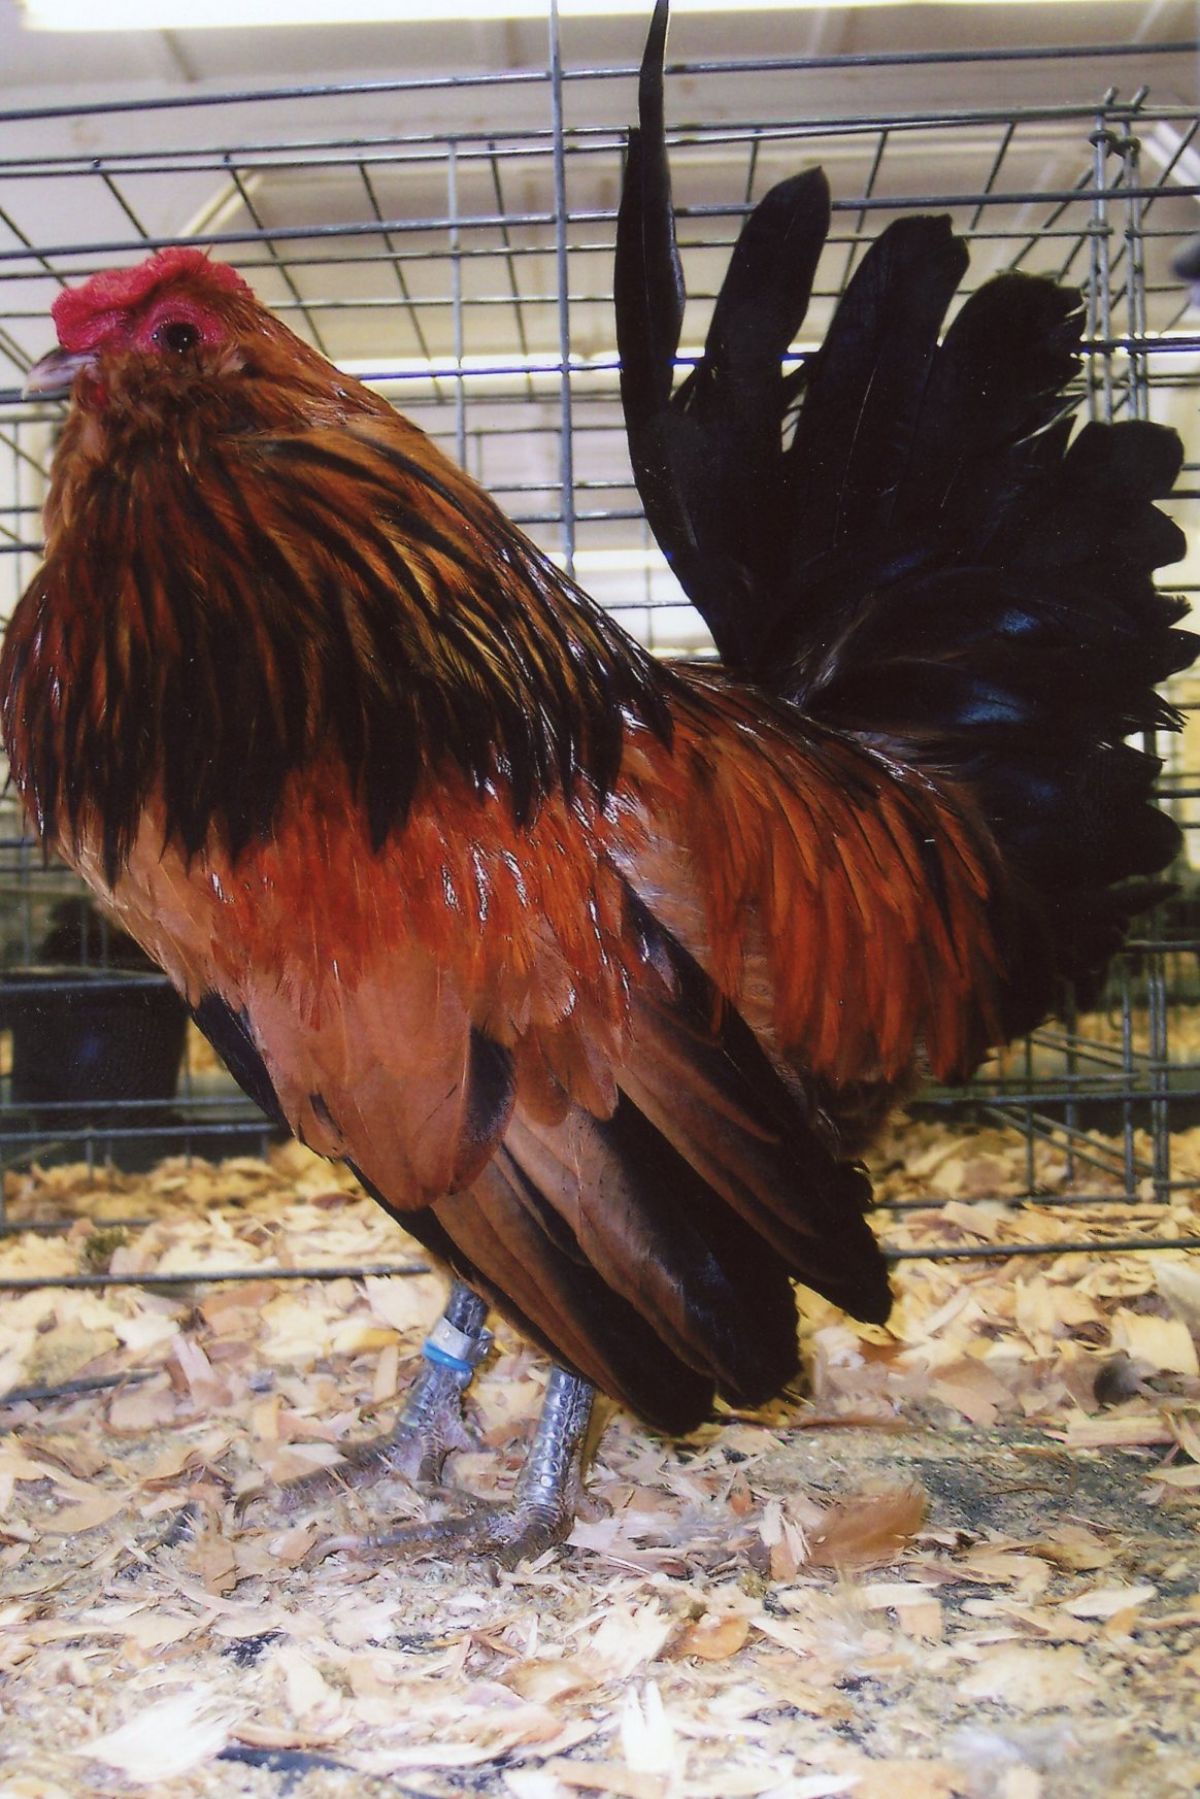 An adorable Belgian Bearded d’Anvers rooster in a chicken coop.